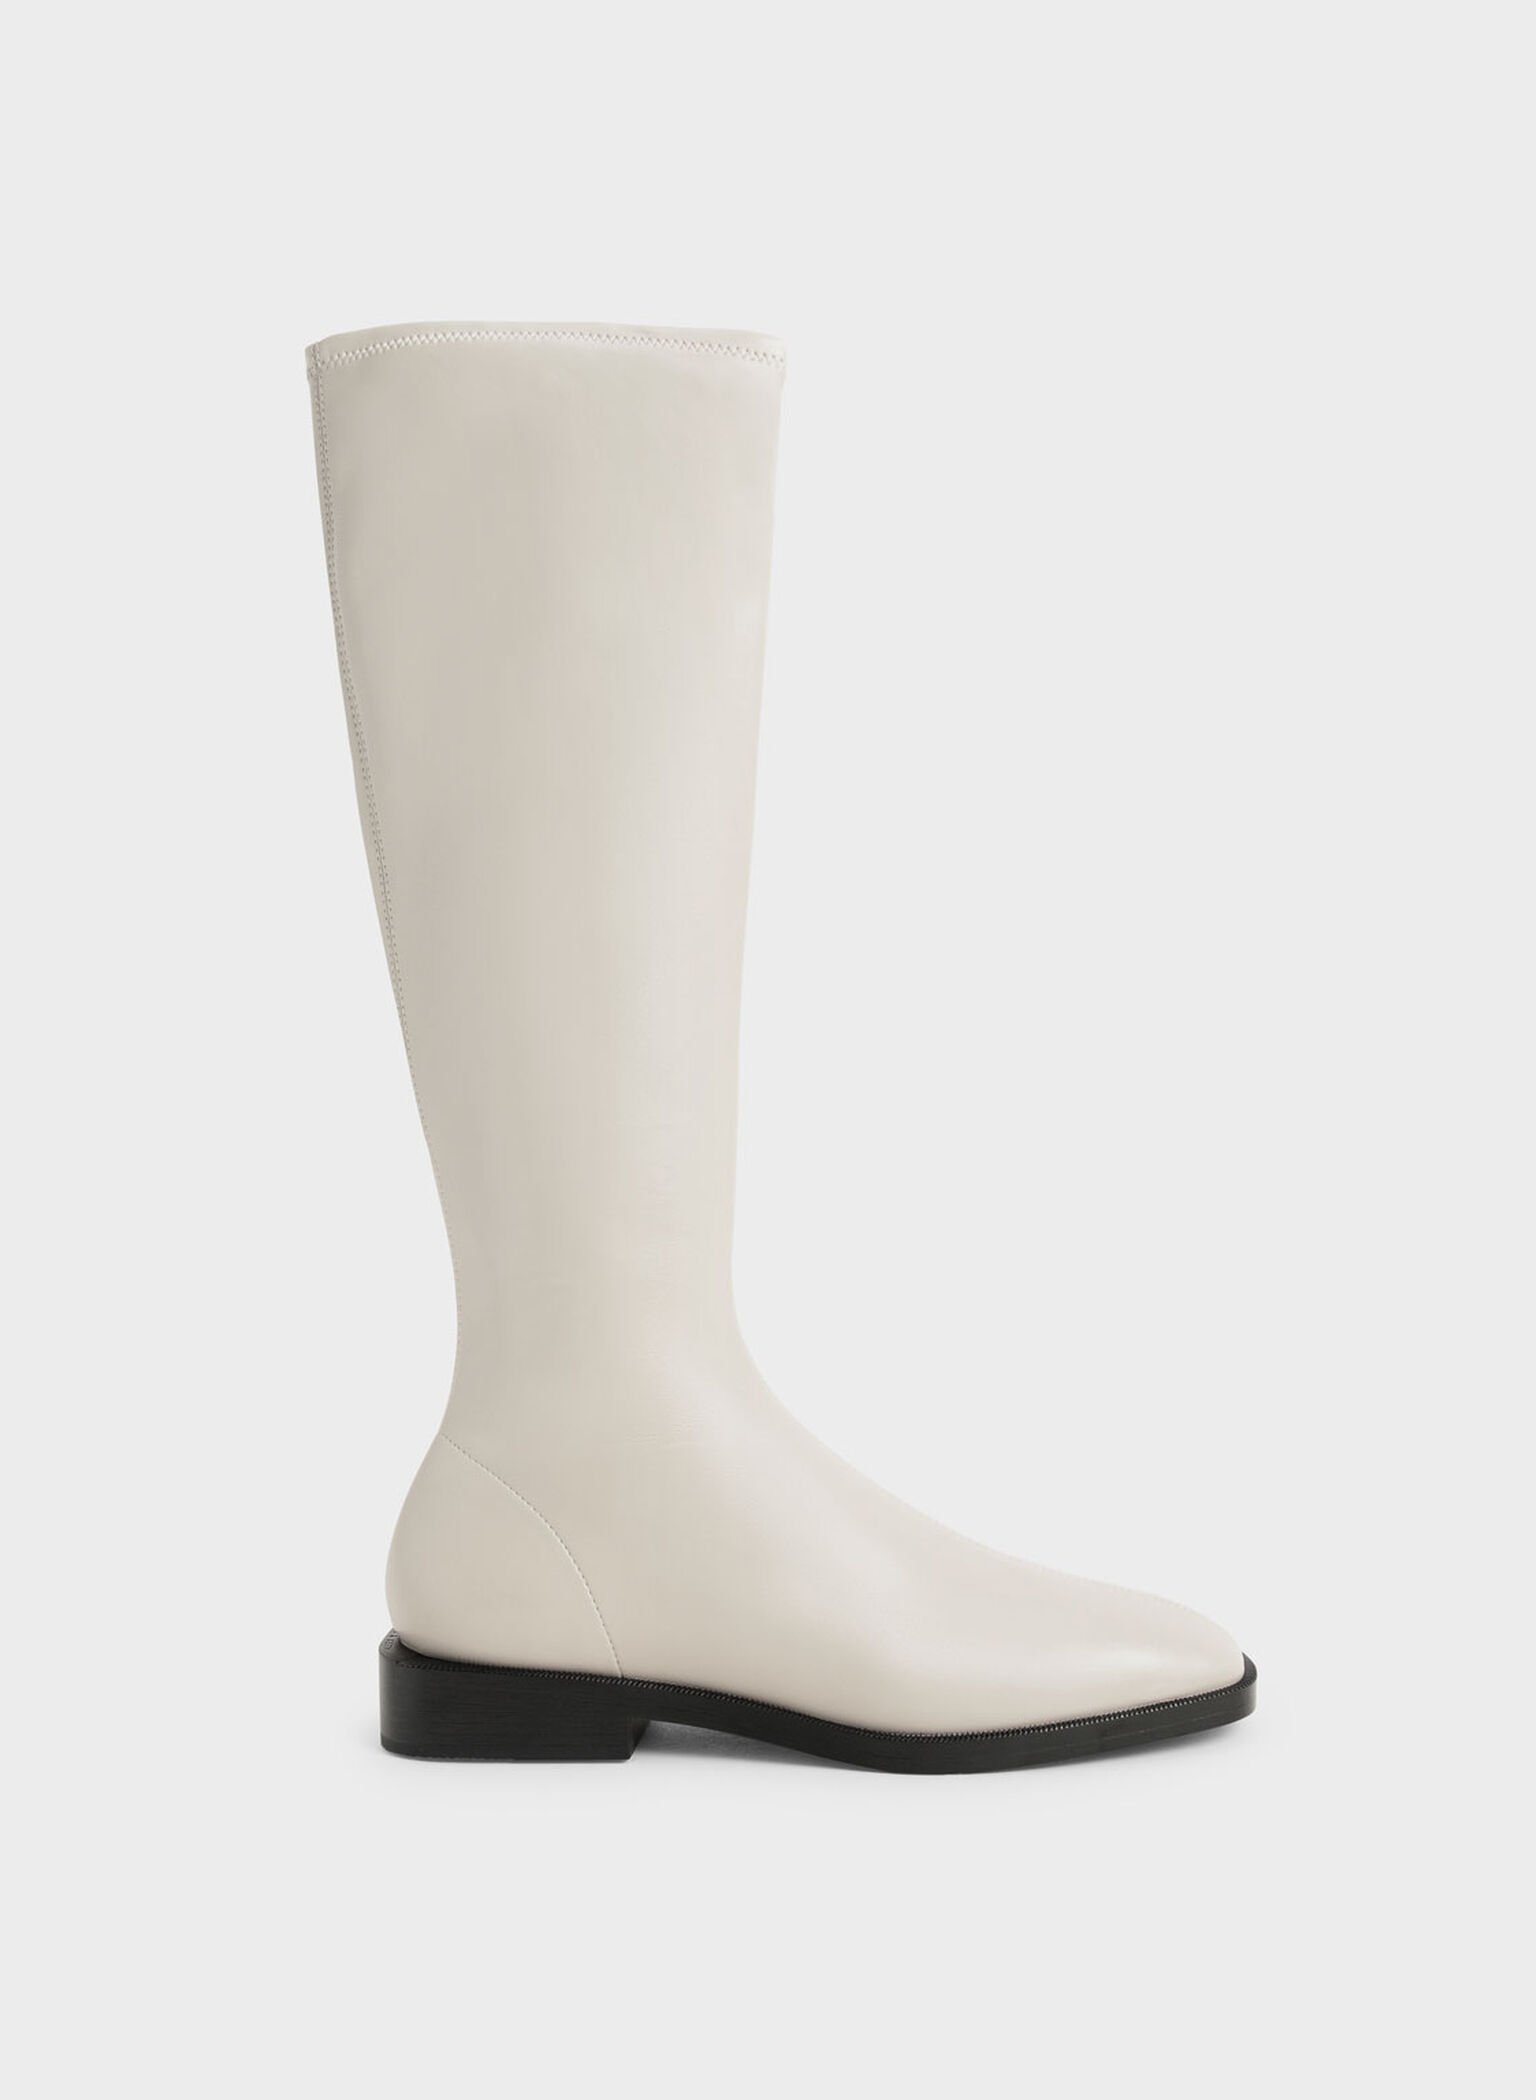 Chalk Knee High Flat Boots - CHARLES & KEITH US